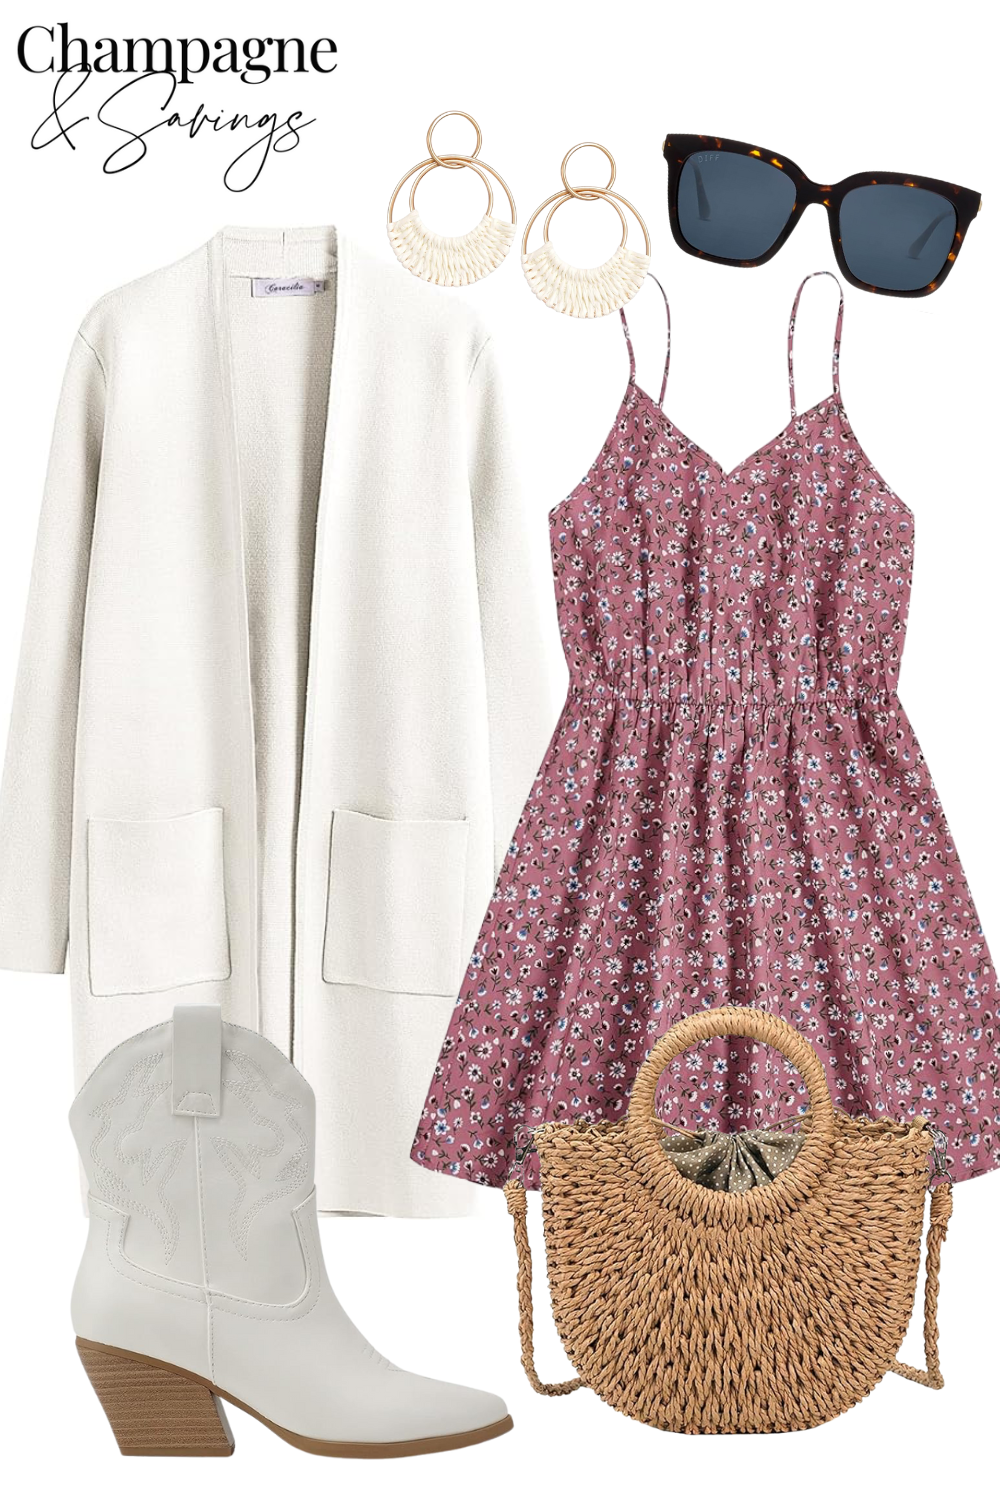 product collage with long white cardigan, gold and white earrings, black sunglasses, white cowgirl booties, red floral mini dress, and straw bag